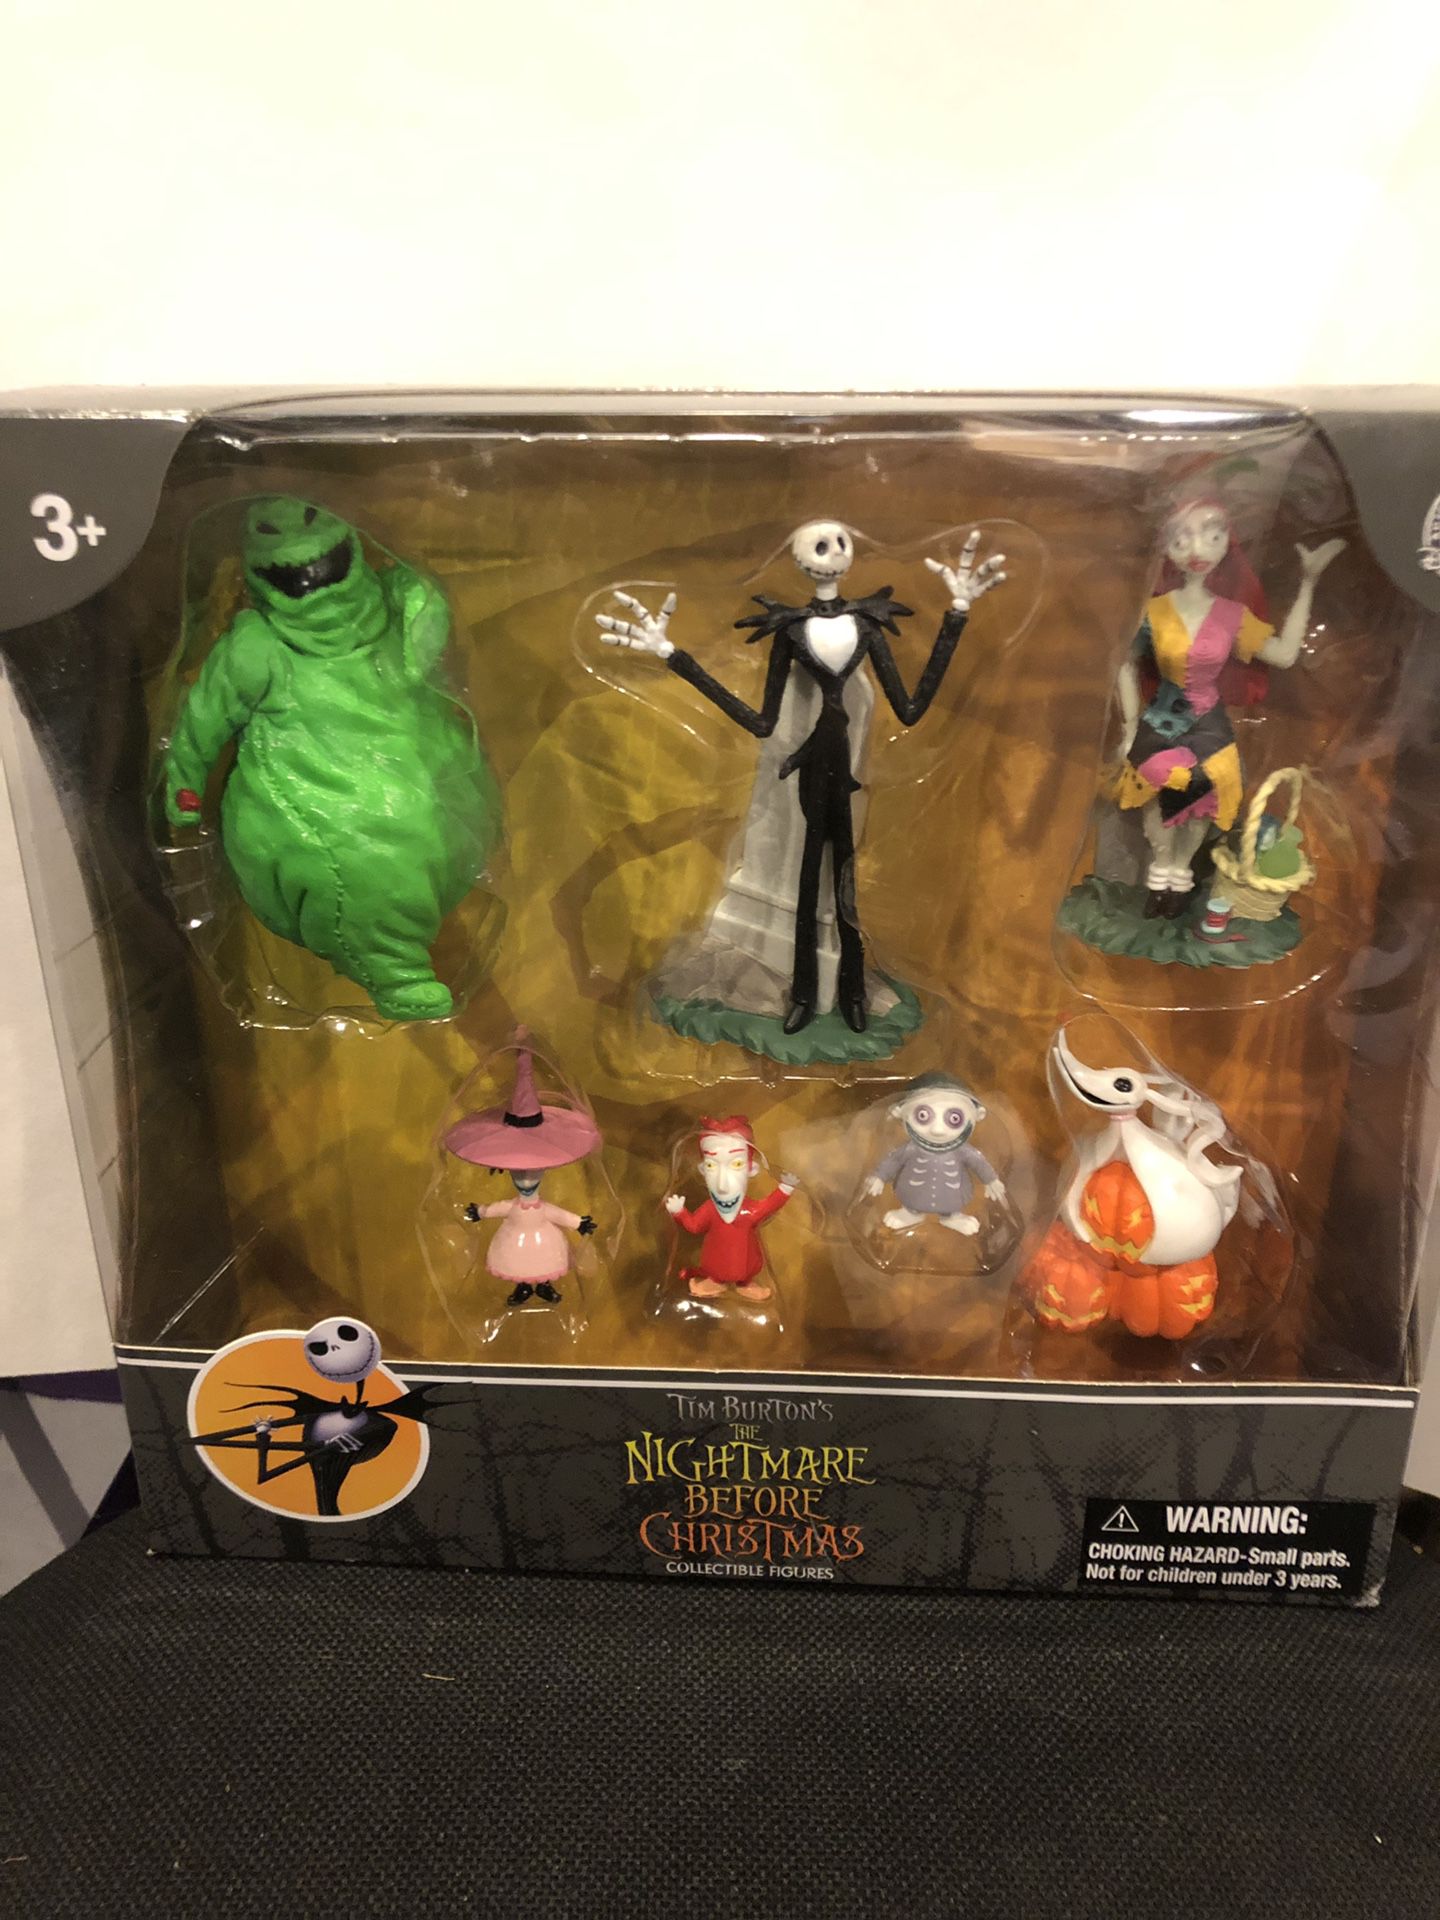 Tim Burton’s Nightmare Before Christmas collectibles Disney Parks collection